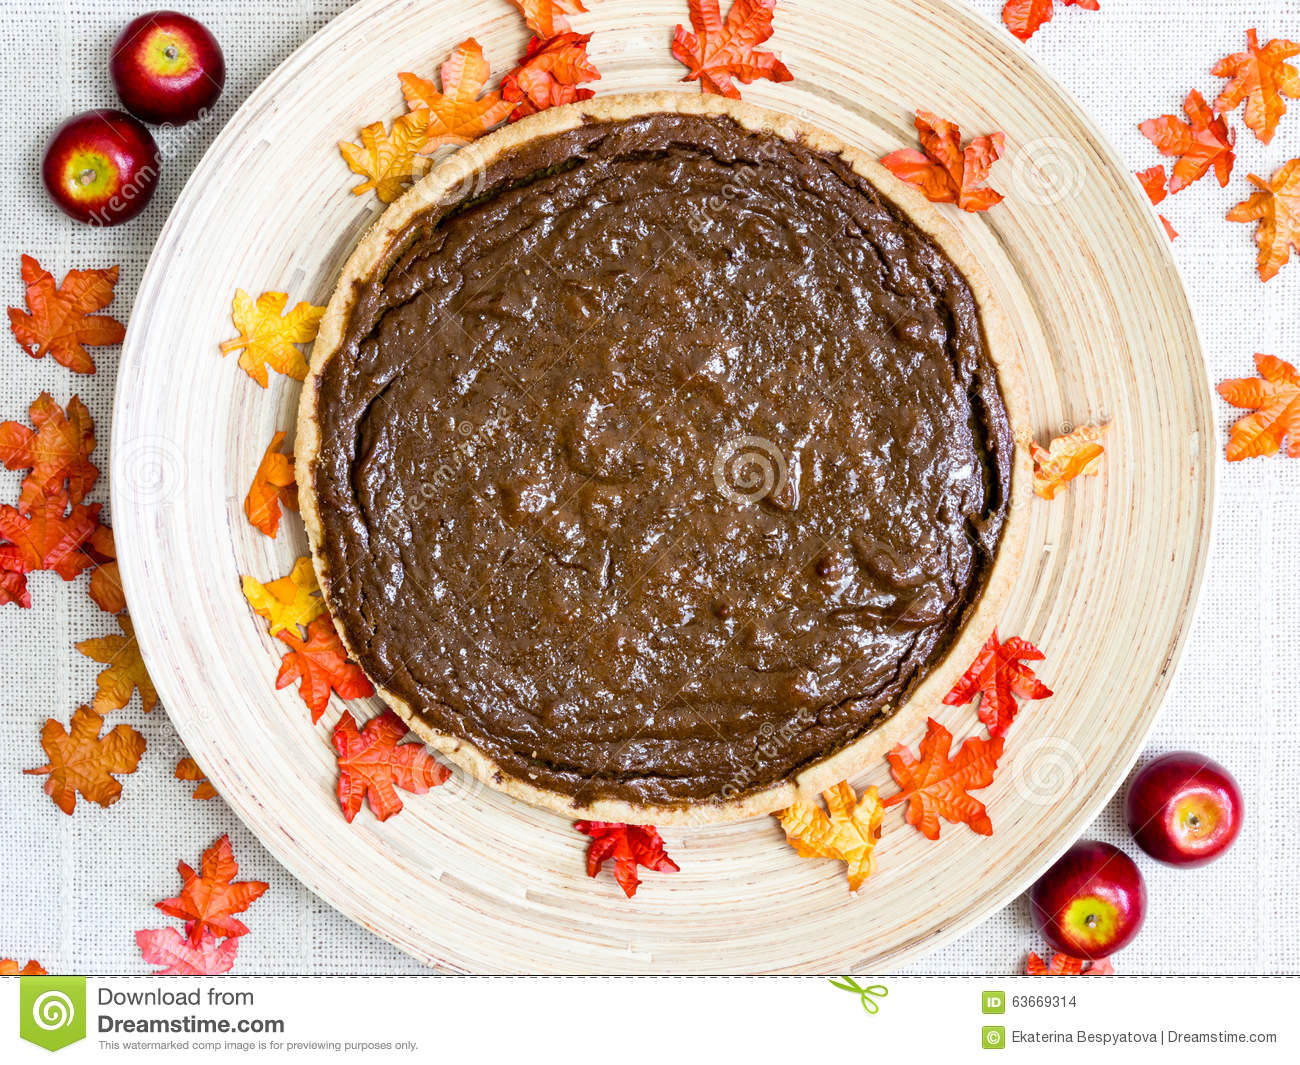 Rustic Homemade Pumpkin Pie On A Round Plate With Fall Decorations 